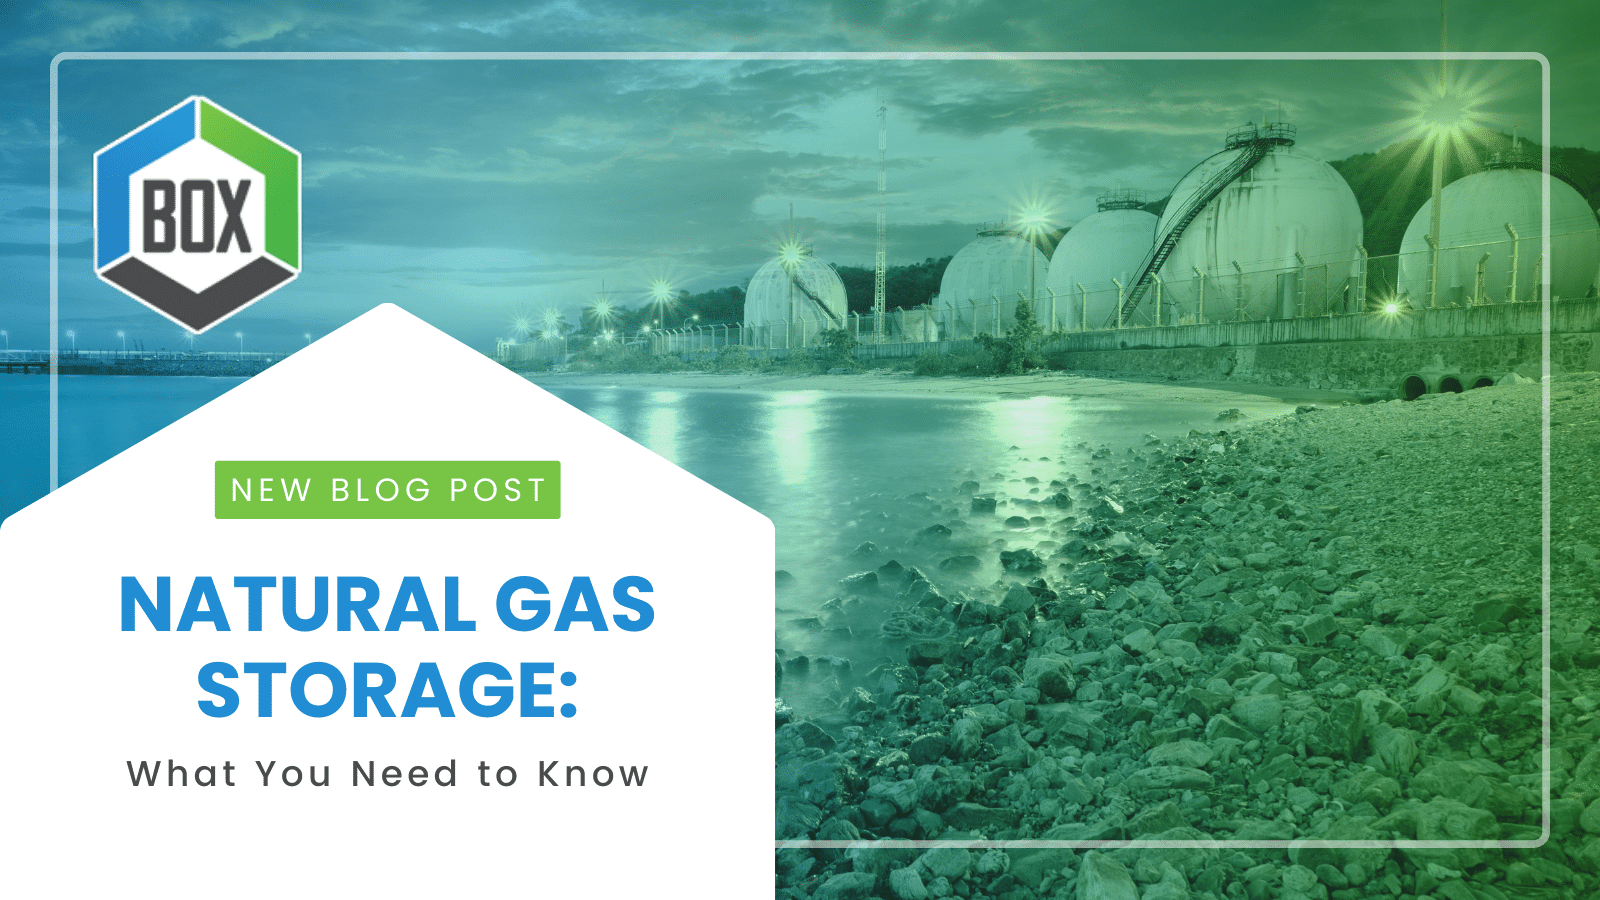 BOX NATURAL GAS STORAGE WHAT YOU NEED TO KNOW